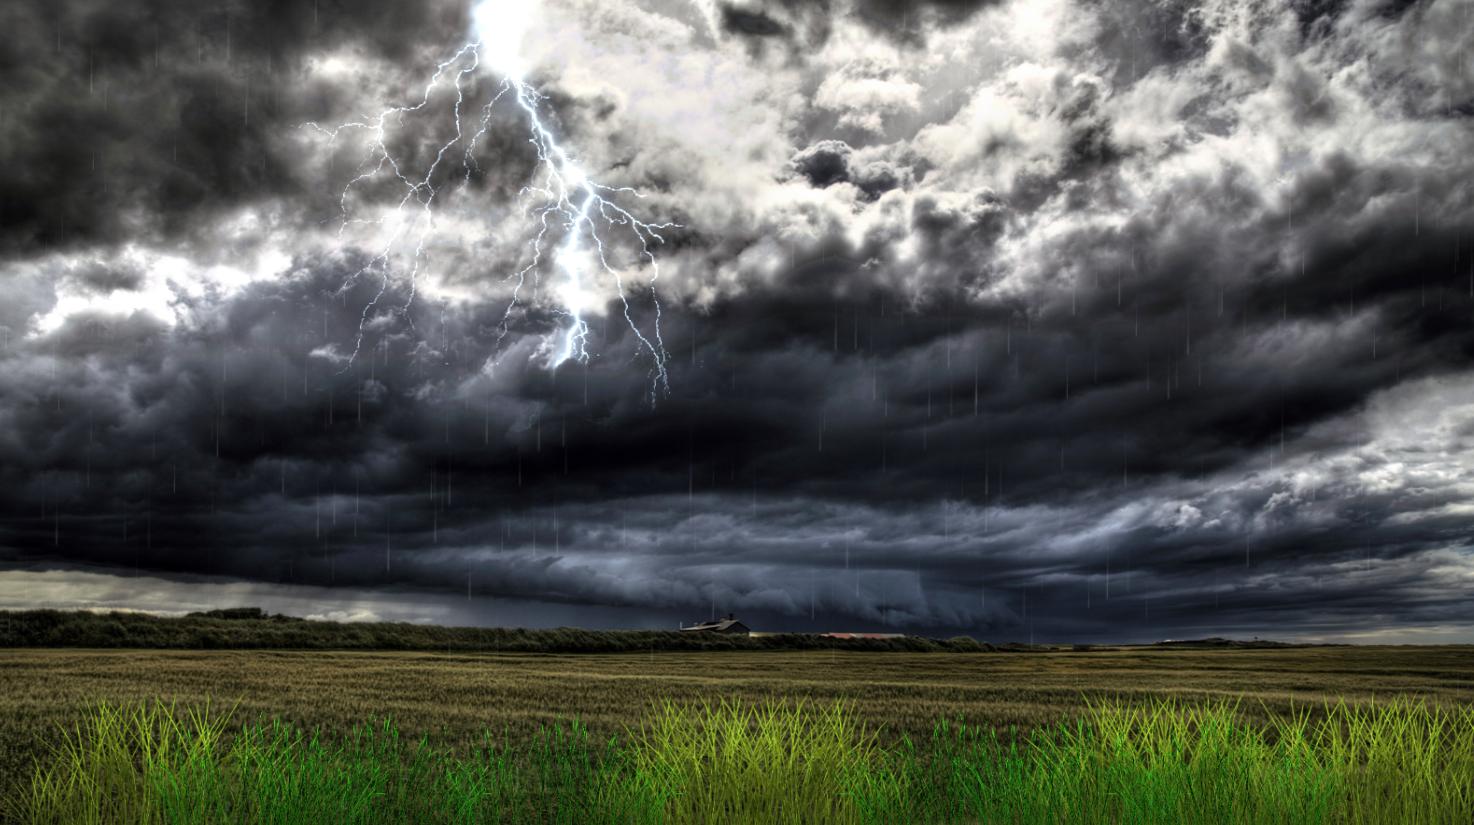 Now Thunderstorm Field Animated Wallpaper Ed